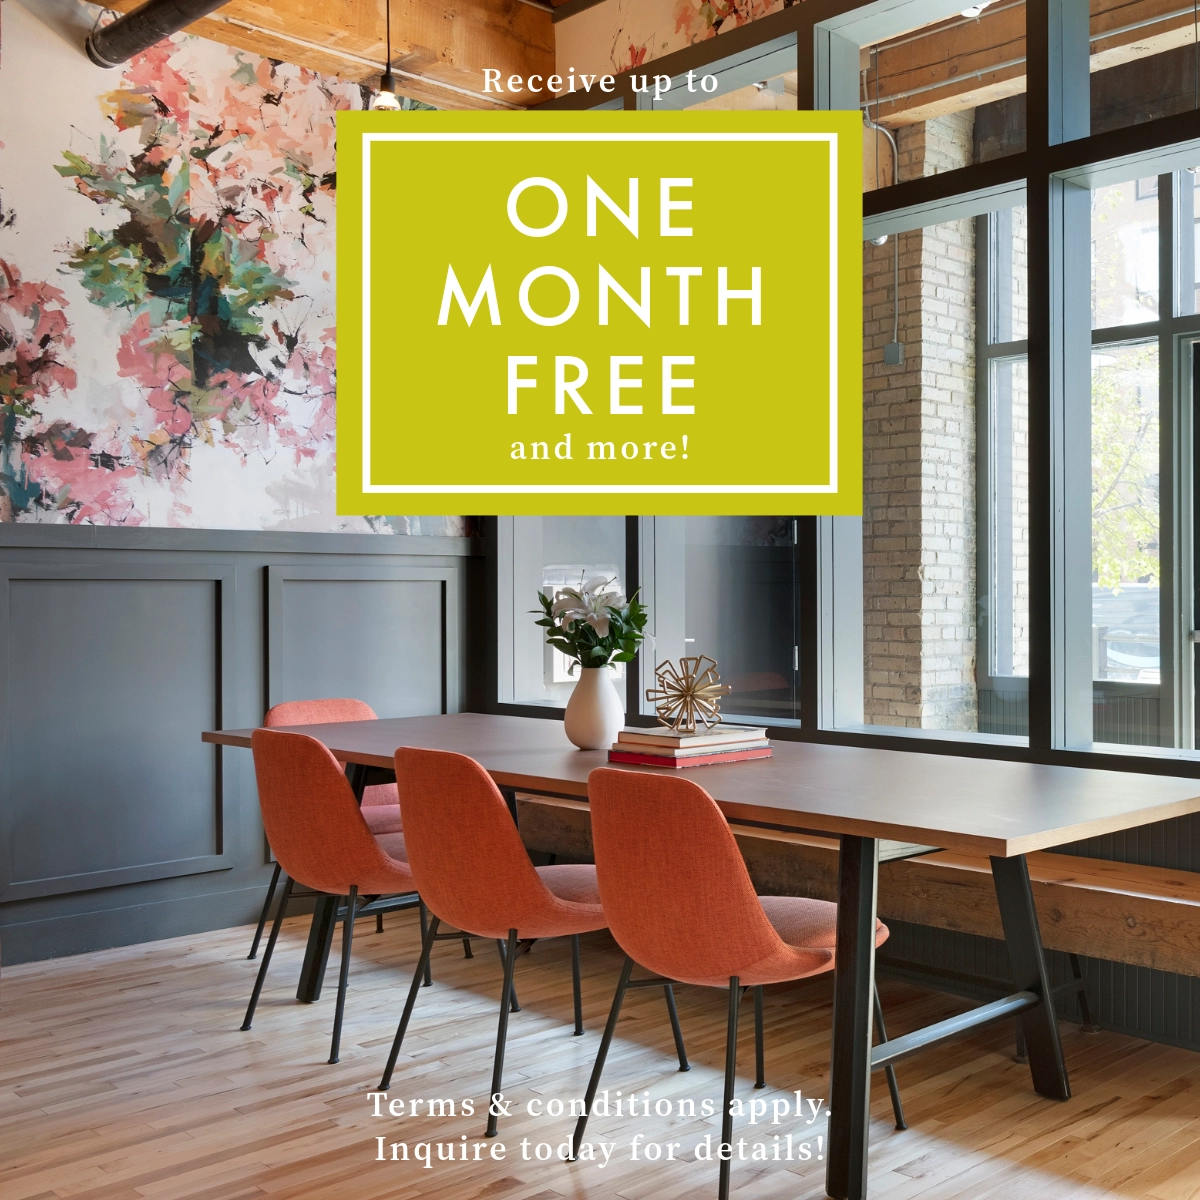 Receive up to 1 month free and more! Terms and conditions apply. Inquire today for details!